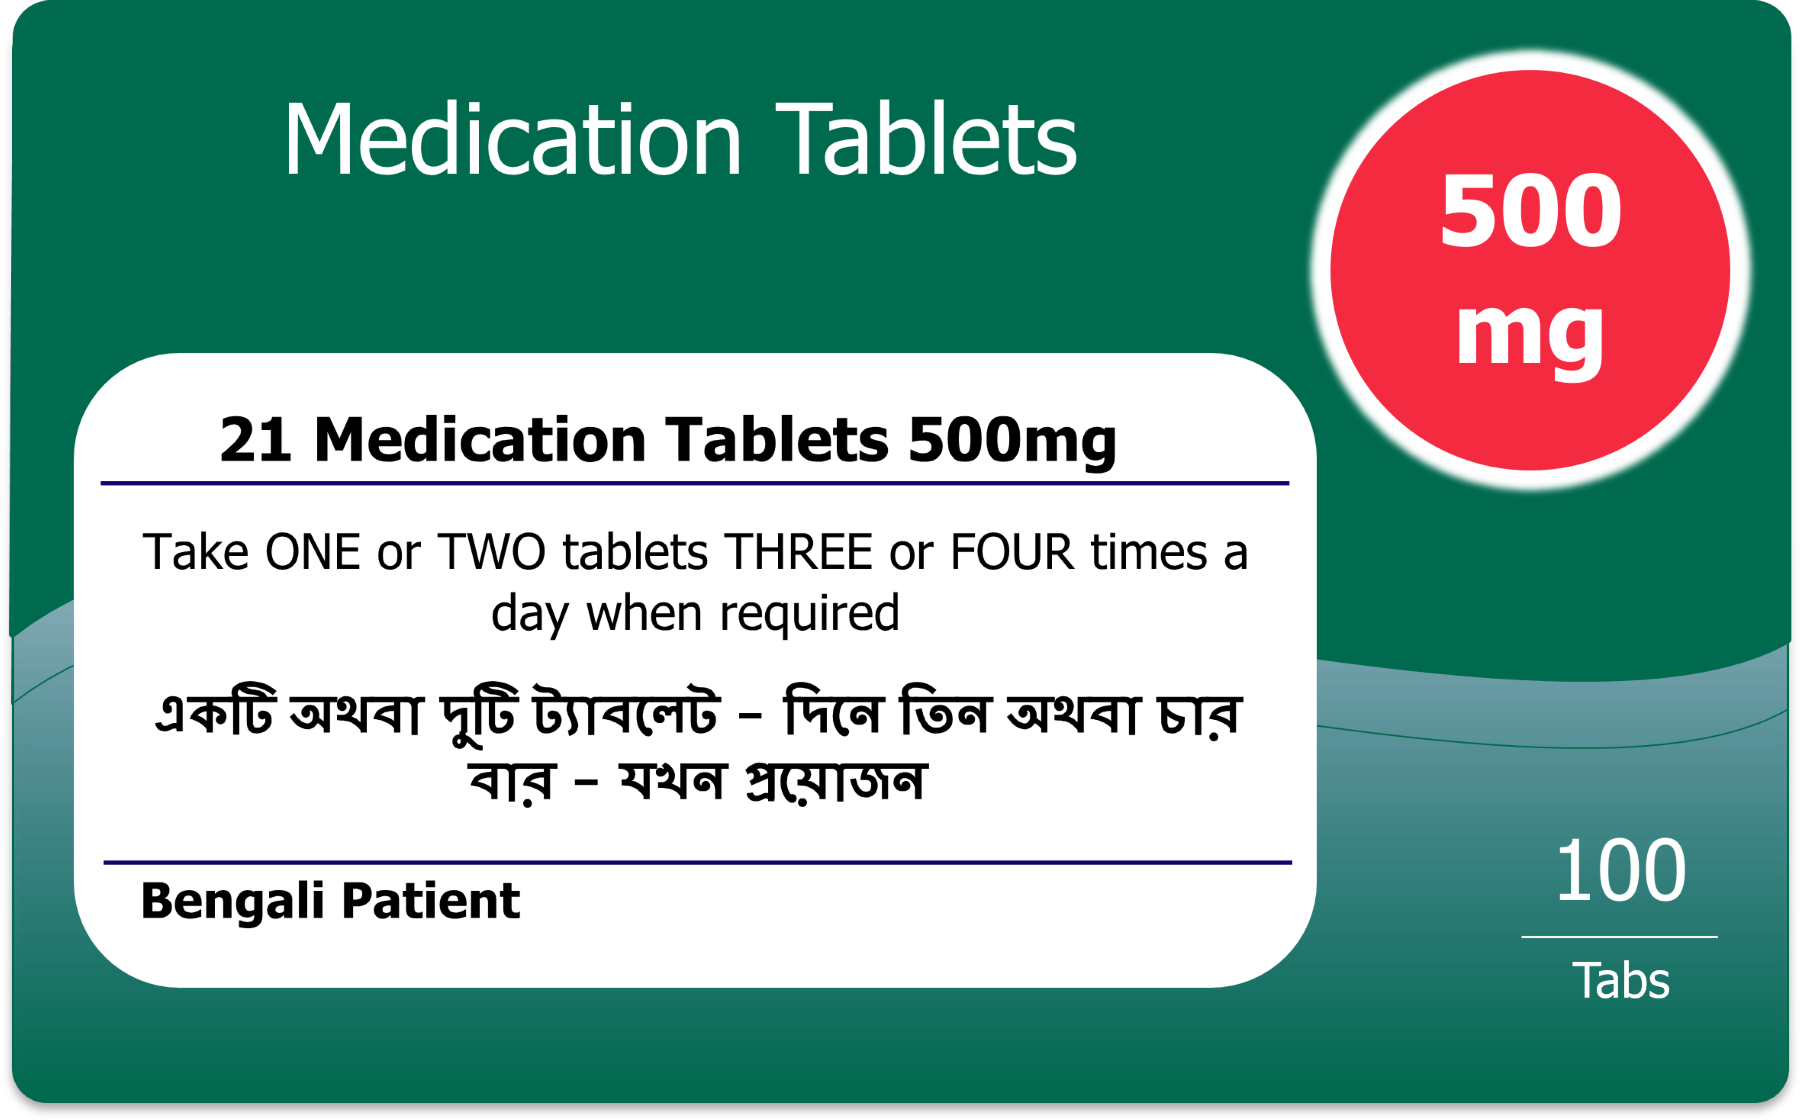 Example of medicines label translated into Bengali